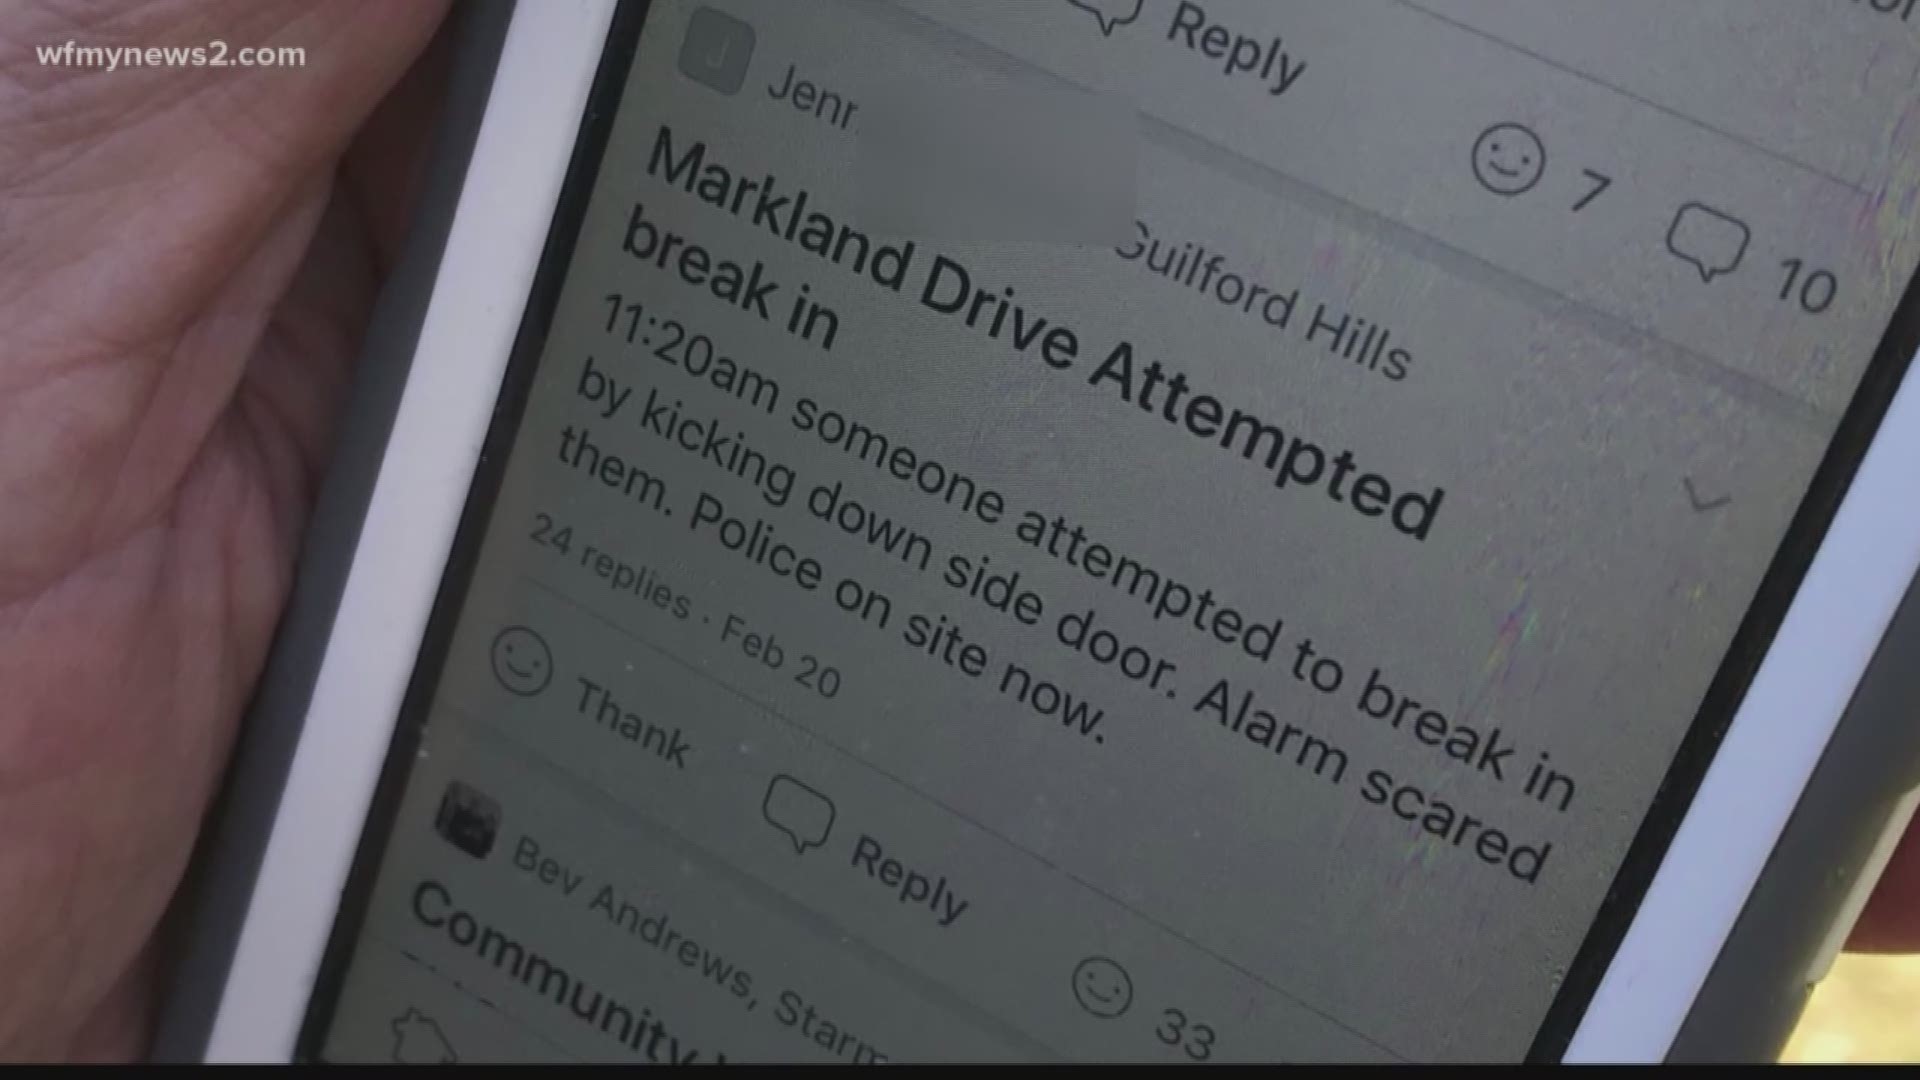 Nextdoor app allows neighbors to work together and with cops to fight crime.